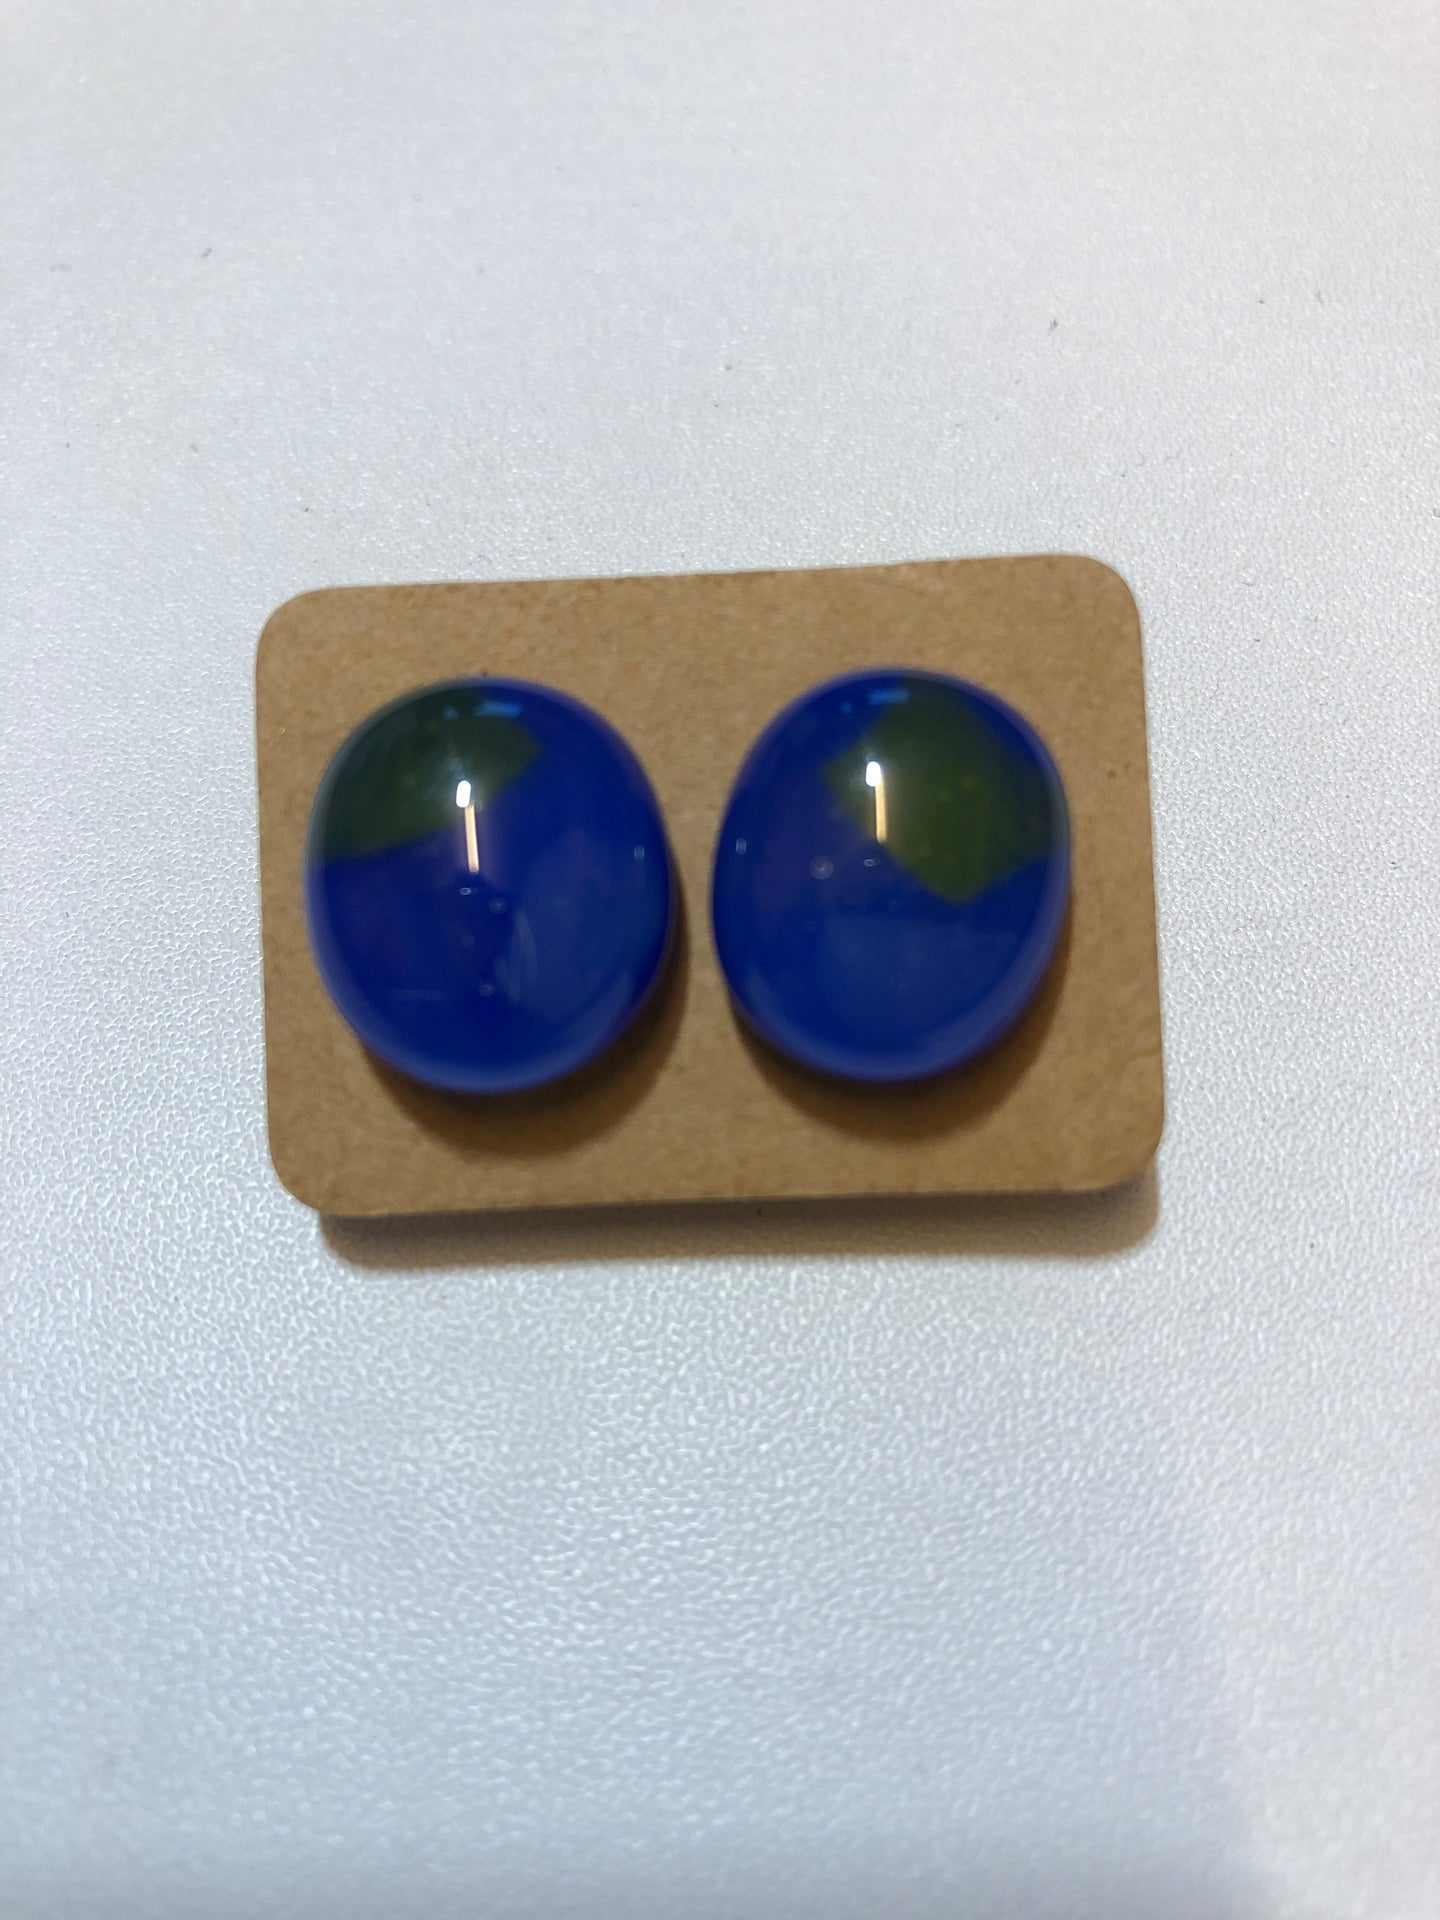 Stunning Blue & yellow Fused Glass Earrings